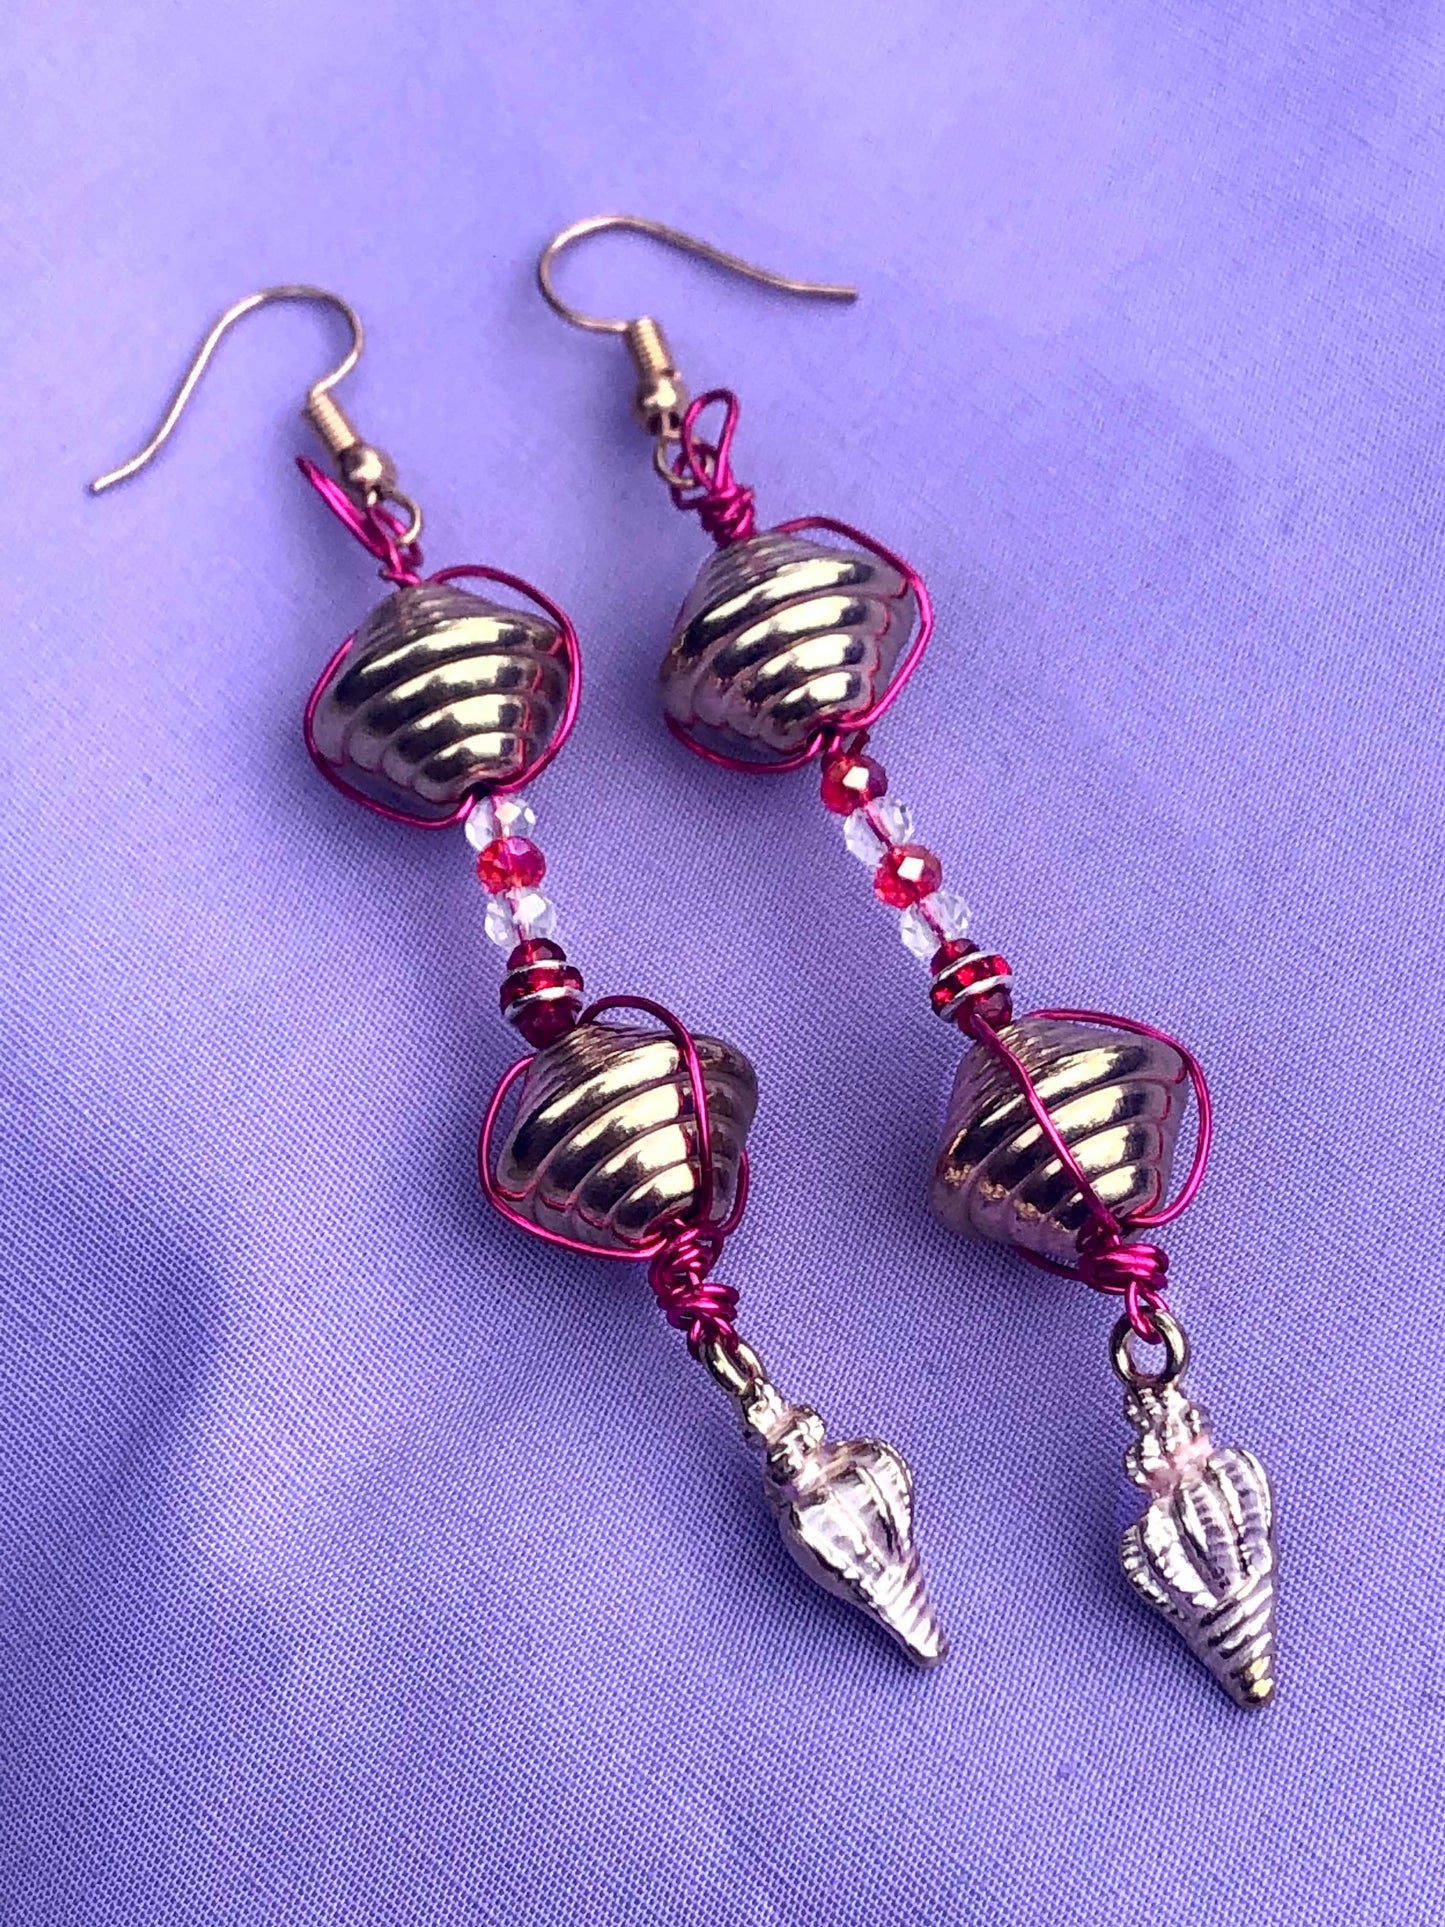 Handcrafted pink wire wrapped, beaded clear and red crystal earrings with golden and seashell charms.